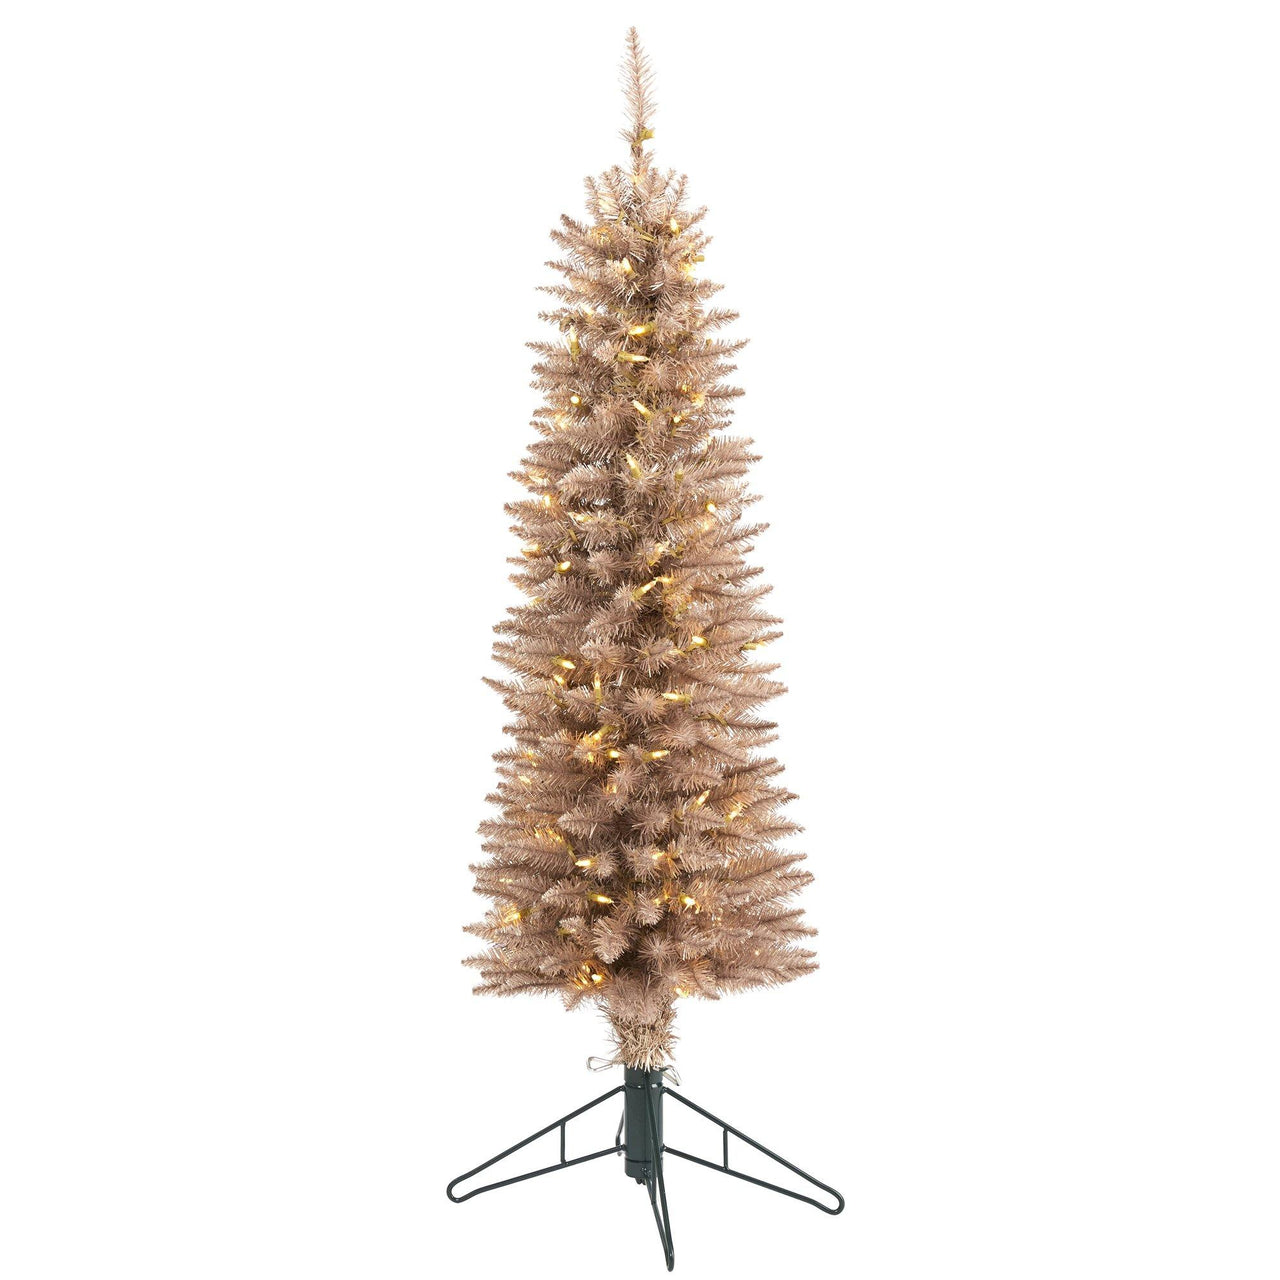 4’ Champagne Pencil Artificial Christmas Tree with 150 (multifunction) Clear LED Lights